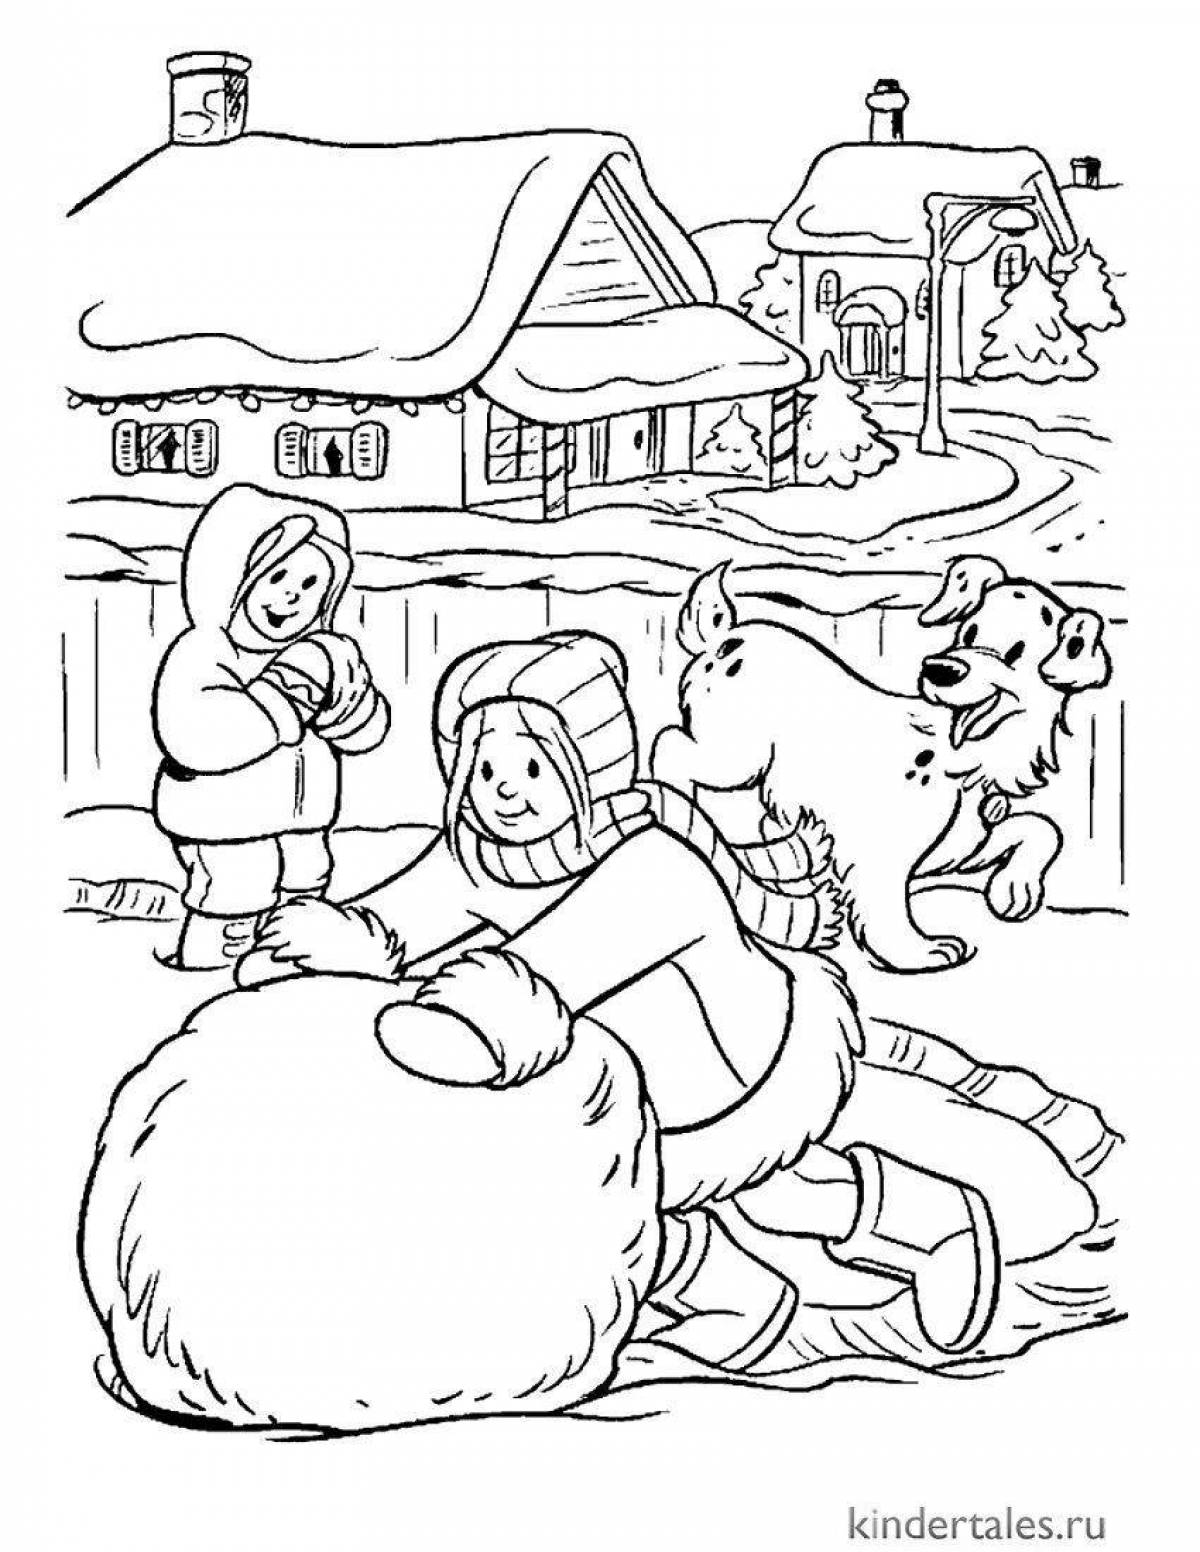 Coloring page mesmerizing village in winter